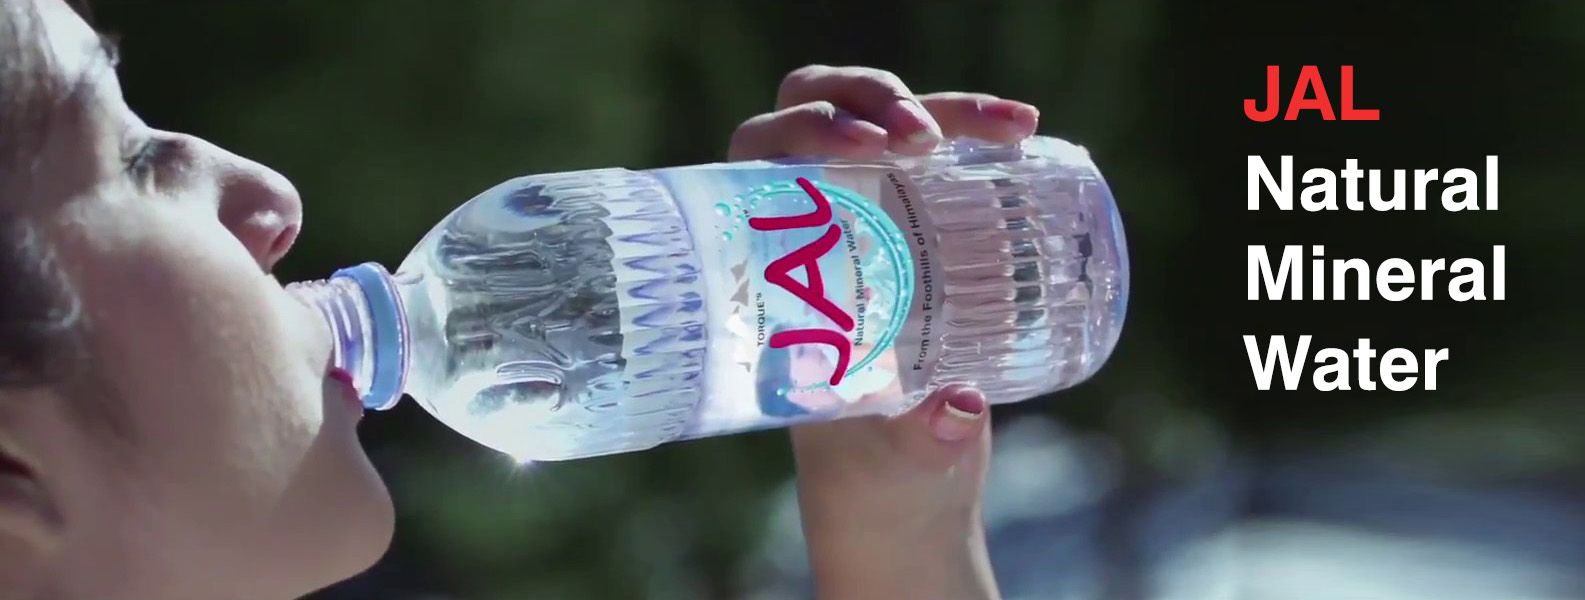 JAL NATURAL MINERAL WATER IS THE FASTEST GROWING MINERAL WATER BRAND IN INDIA